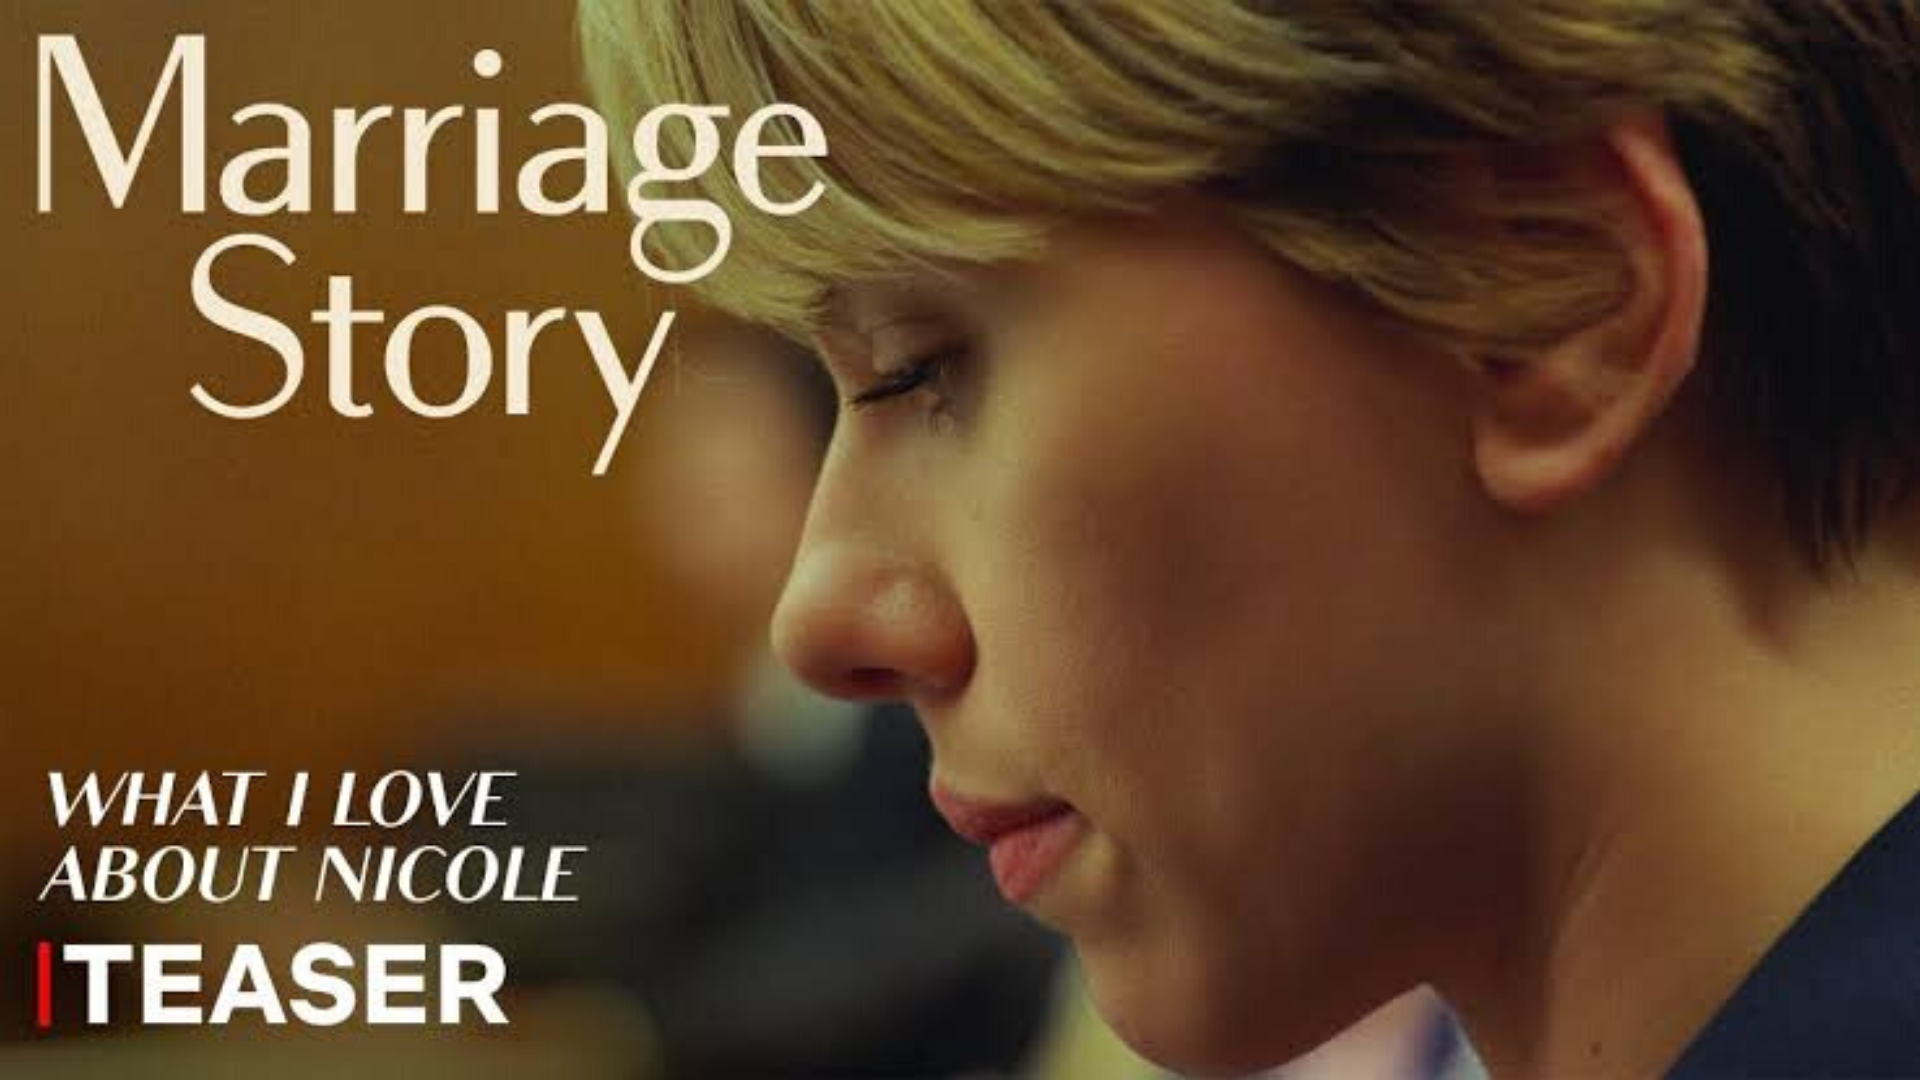 Marriage Story Full Review: What amazing in the Full movie?